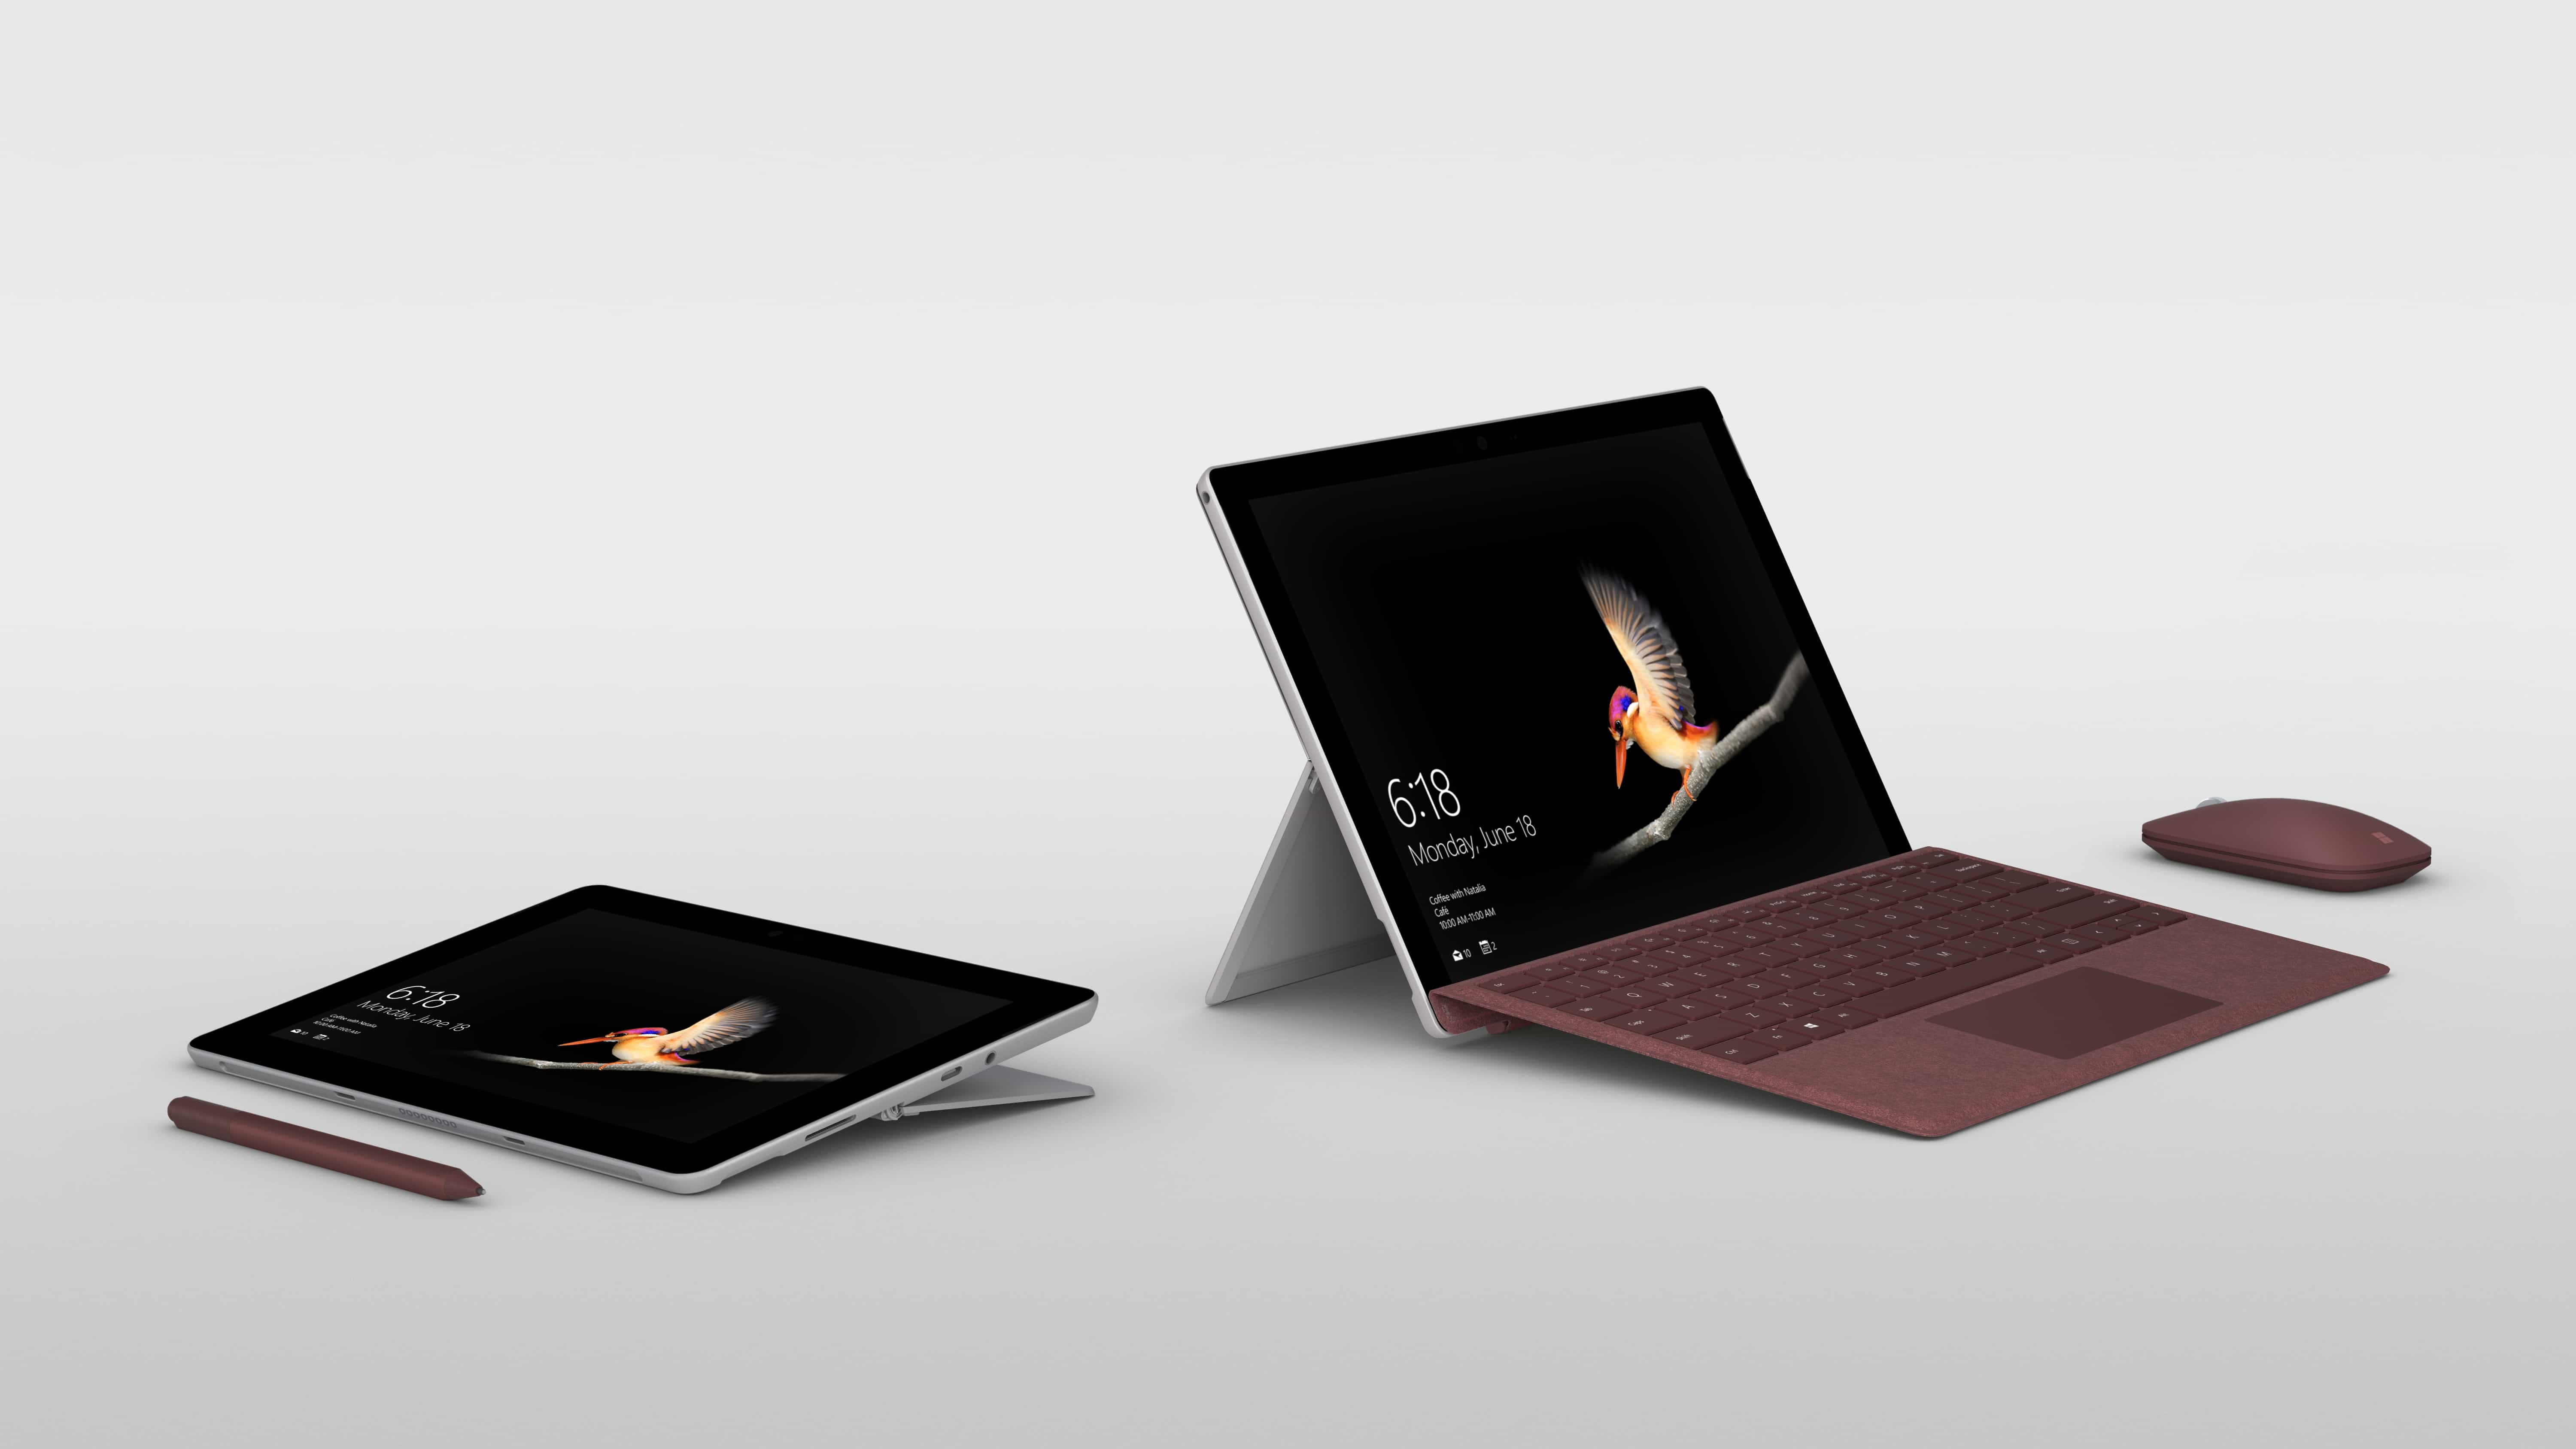 Microsoft - Surface Go - Type Cover - Mouse - Aufgeklappt